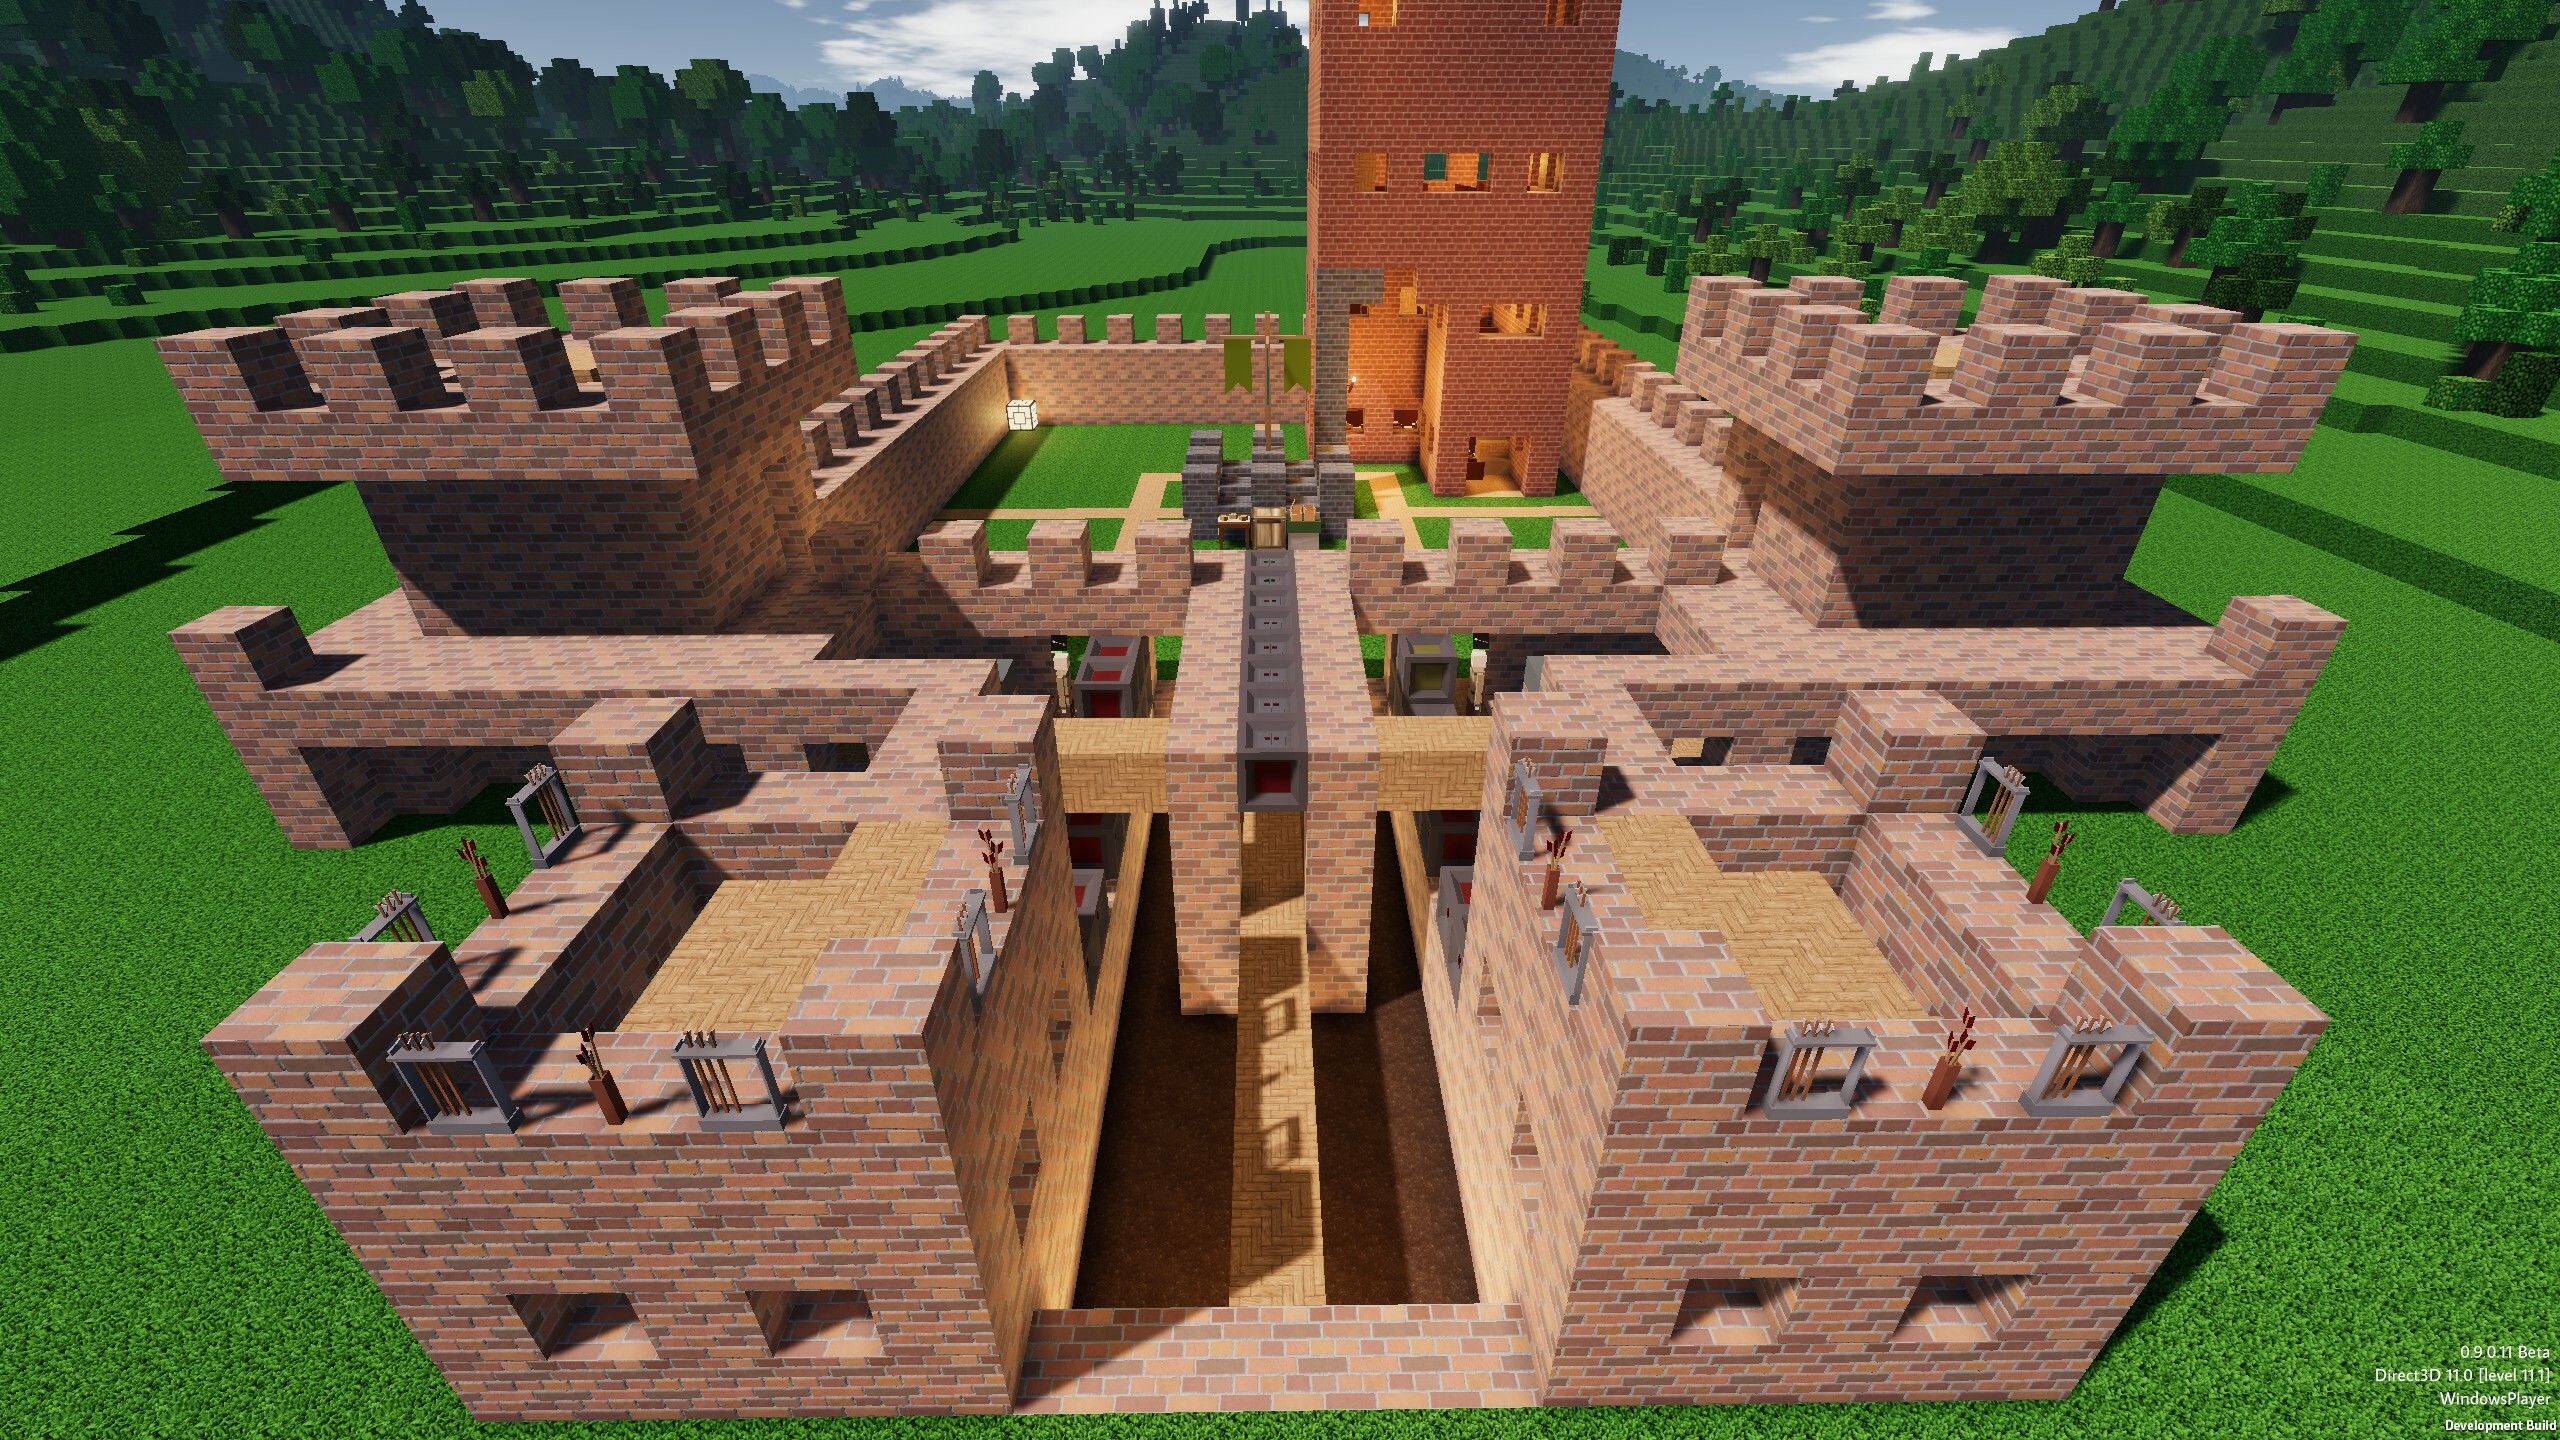 So I built this Castle using the Chisel mod. Please excuse the